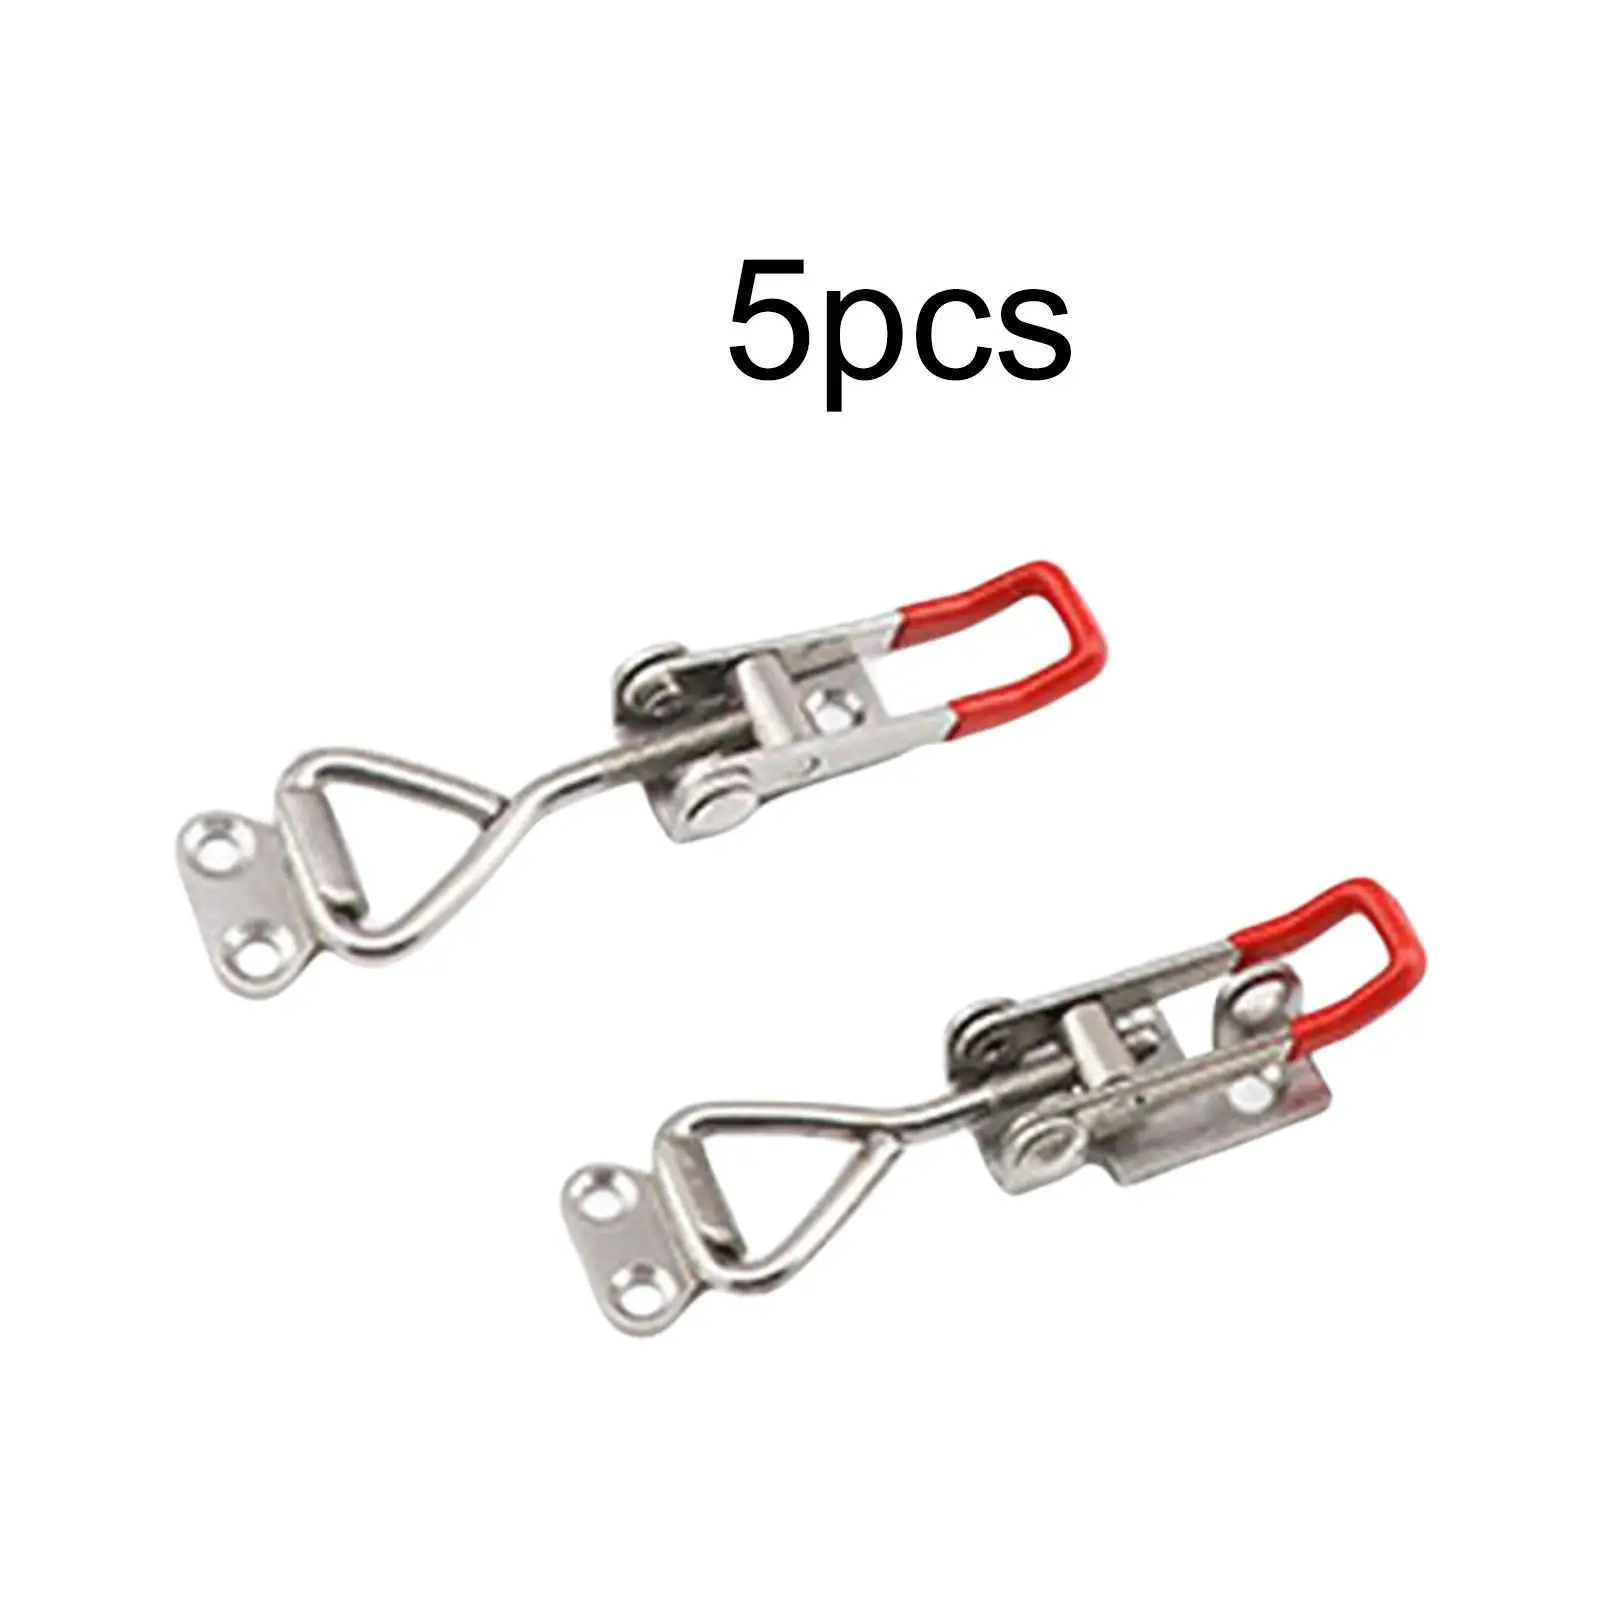 5x Push Pull Action Toggle Latch Clamp Stainless Steel Adjustable Horizontal Quick Release for Tool Box Case Home Sliding Door